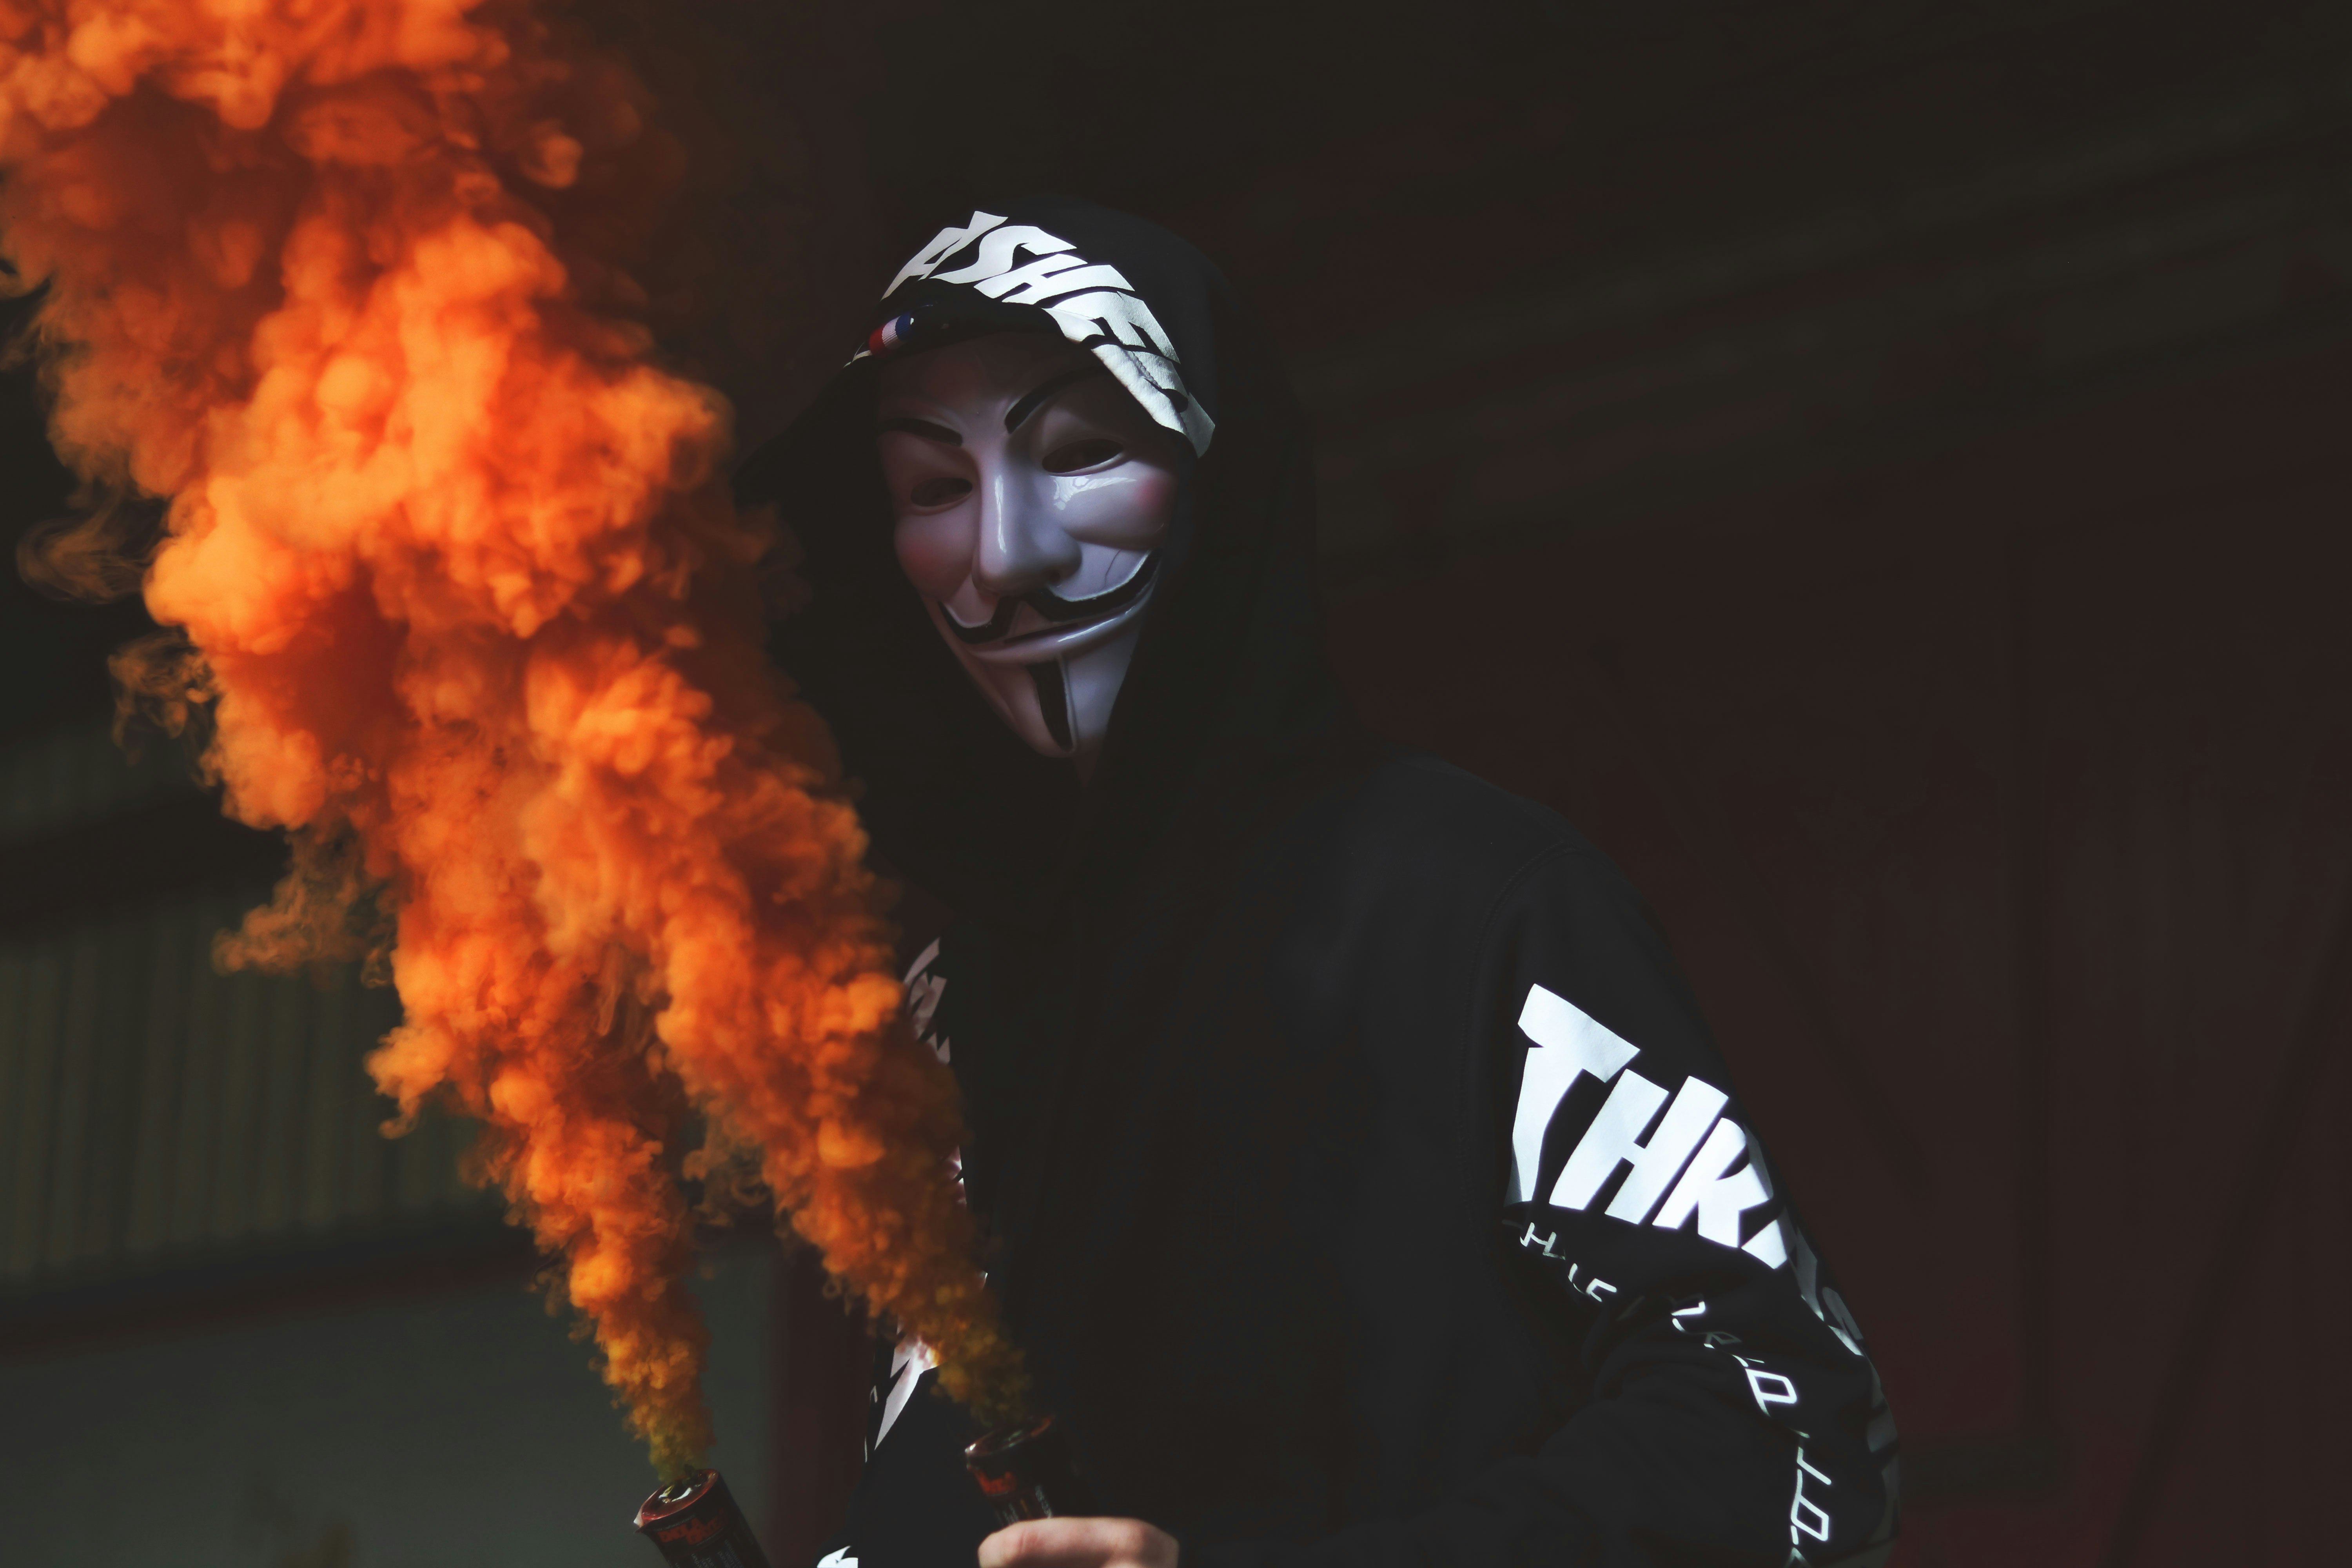 person wearing guy fawkes mask